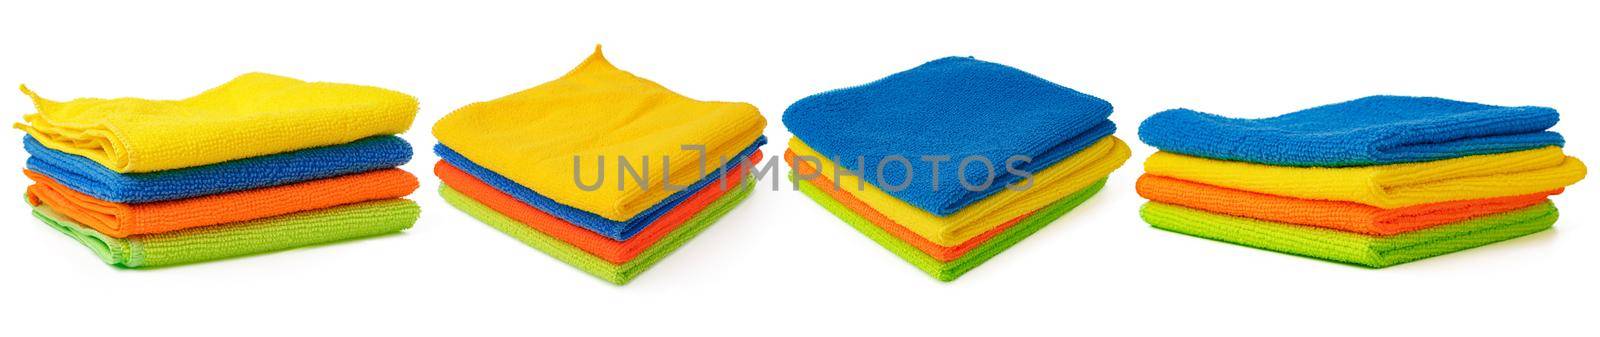 Colored rags for cleaning isolated on white by Fabrikasimf